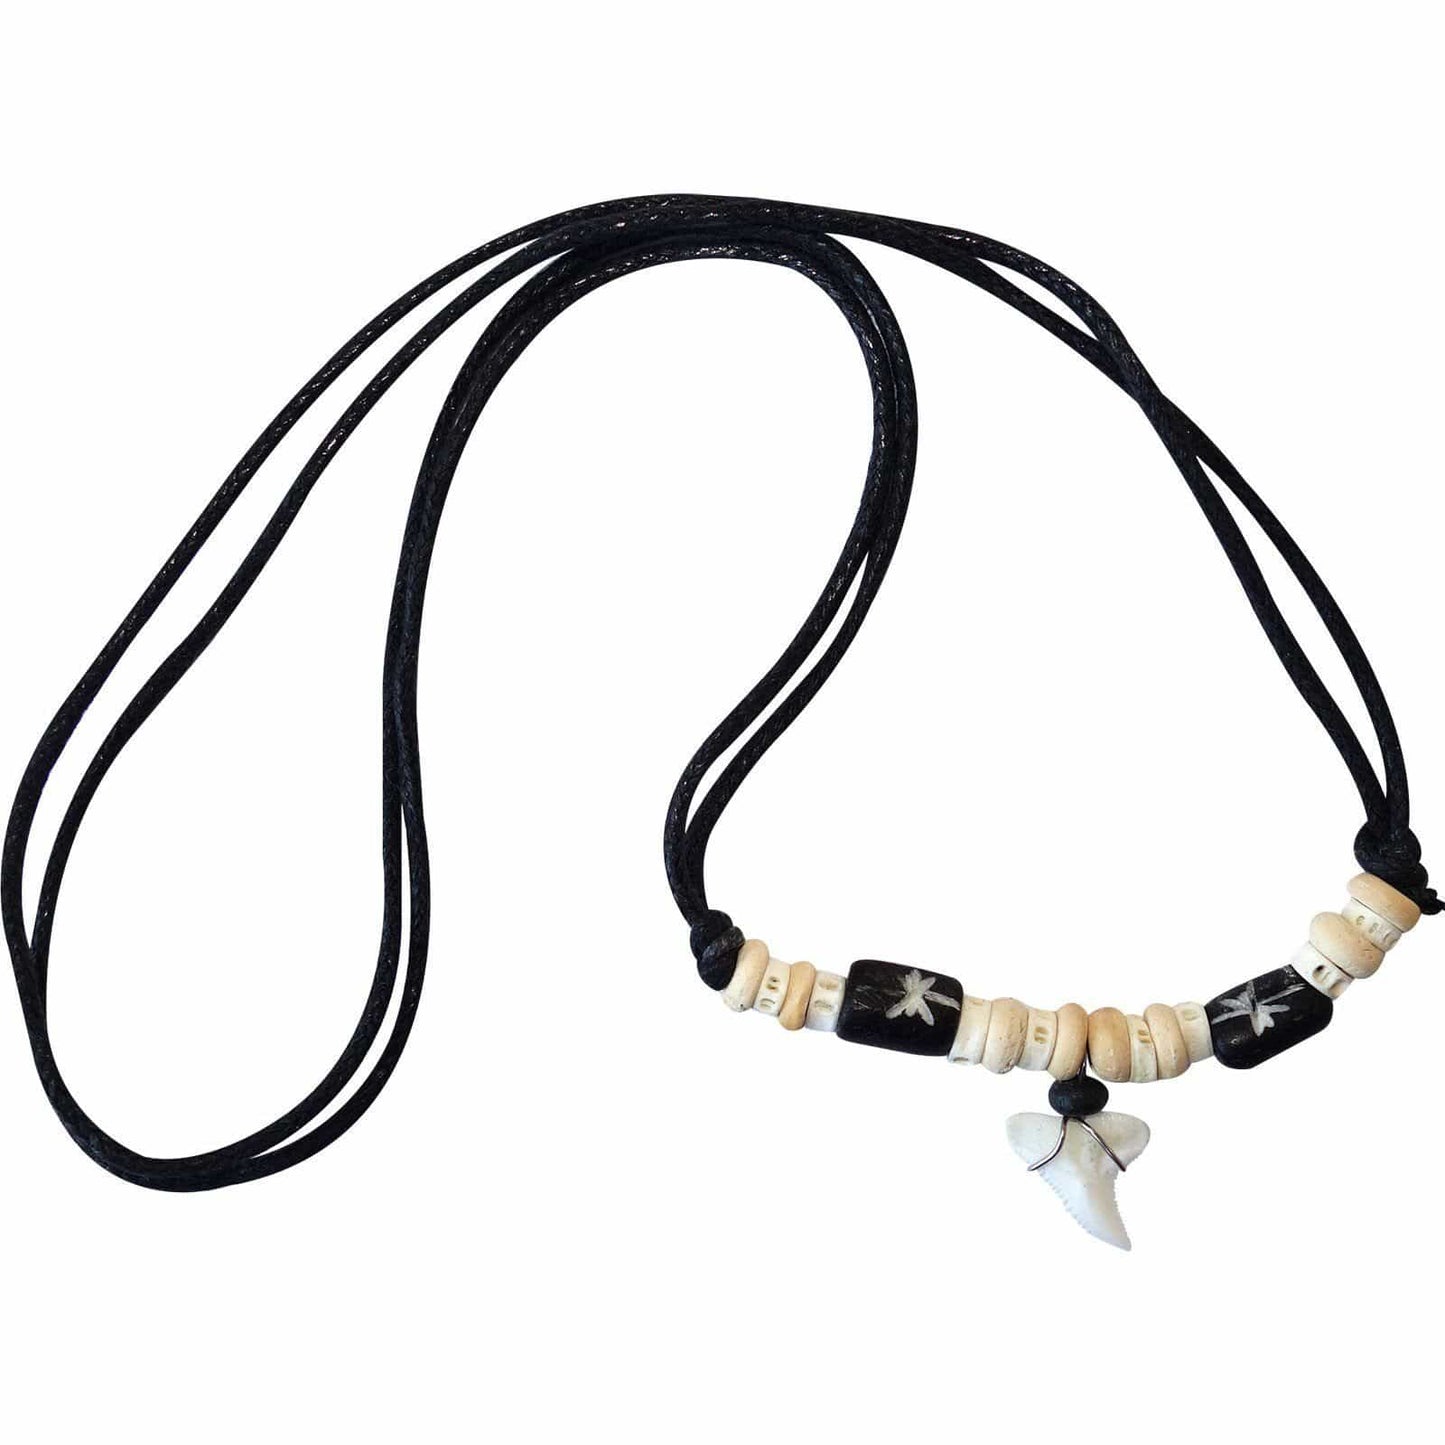 Shark Tooth Necklace Pendant Chain Mens Womens Boys Girls Childrens Jewellery